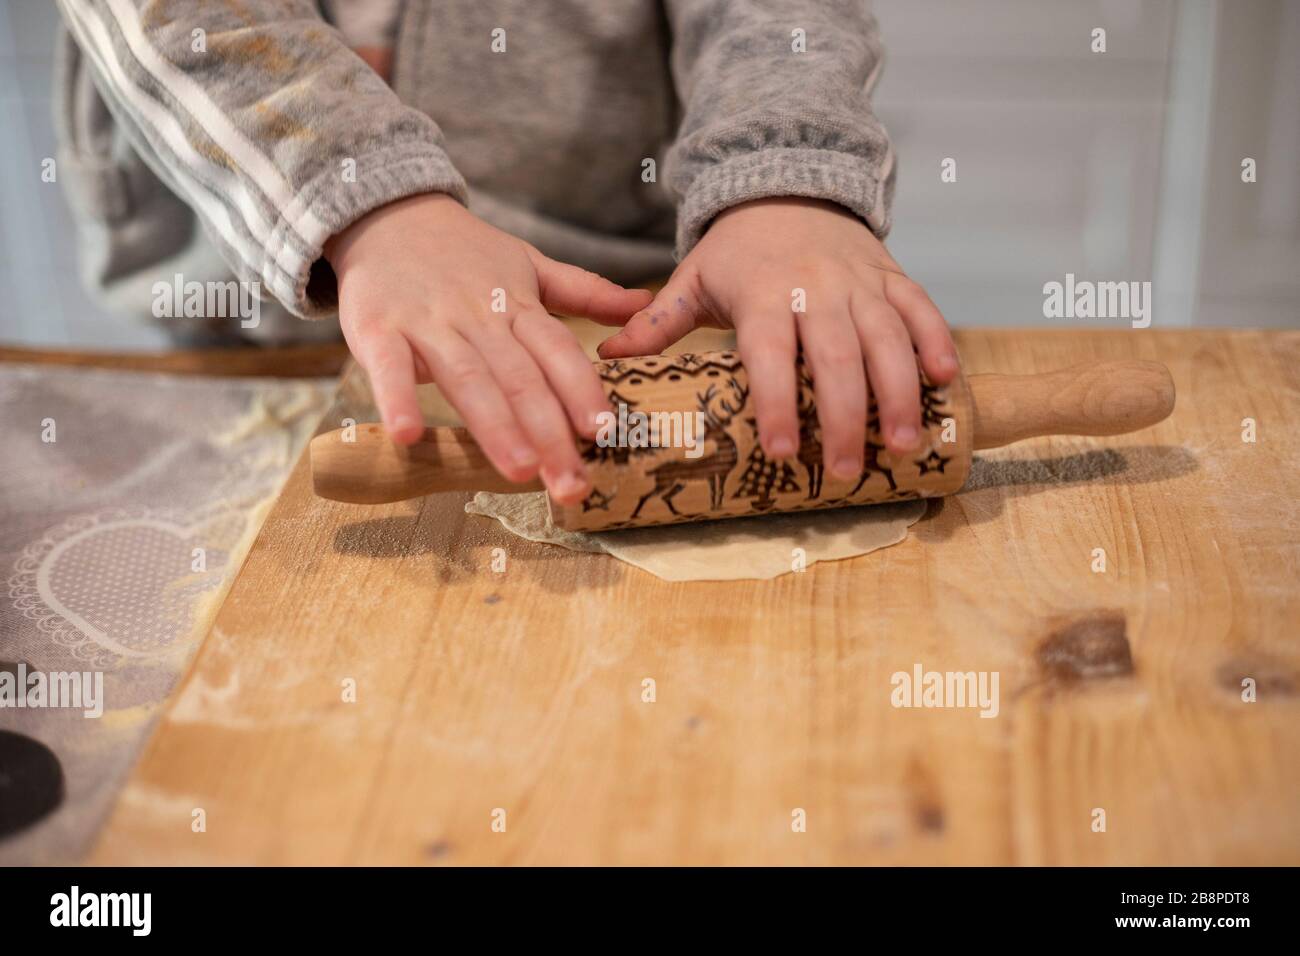 Child girl hands, in white kitchen, flattening pizza dough with a small rolling pin on a wooden board. Lockdown activity idea. Stock Photo